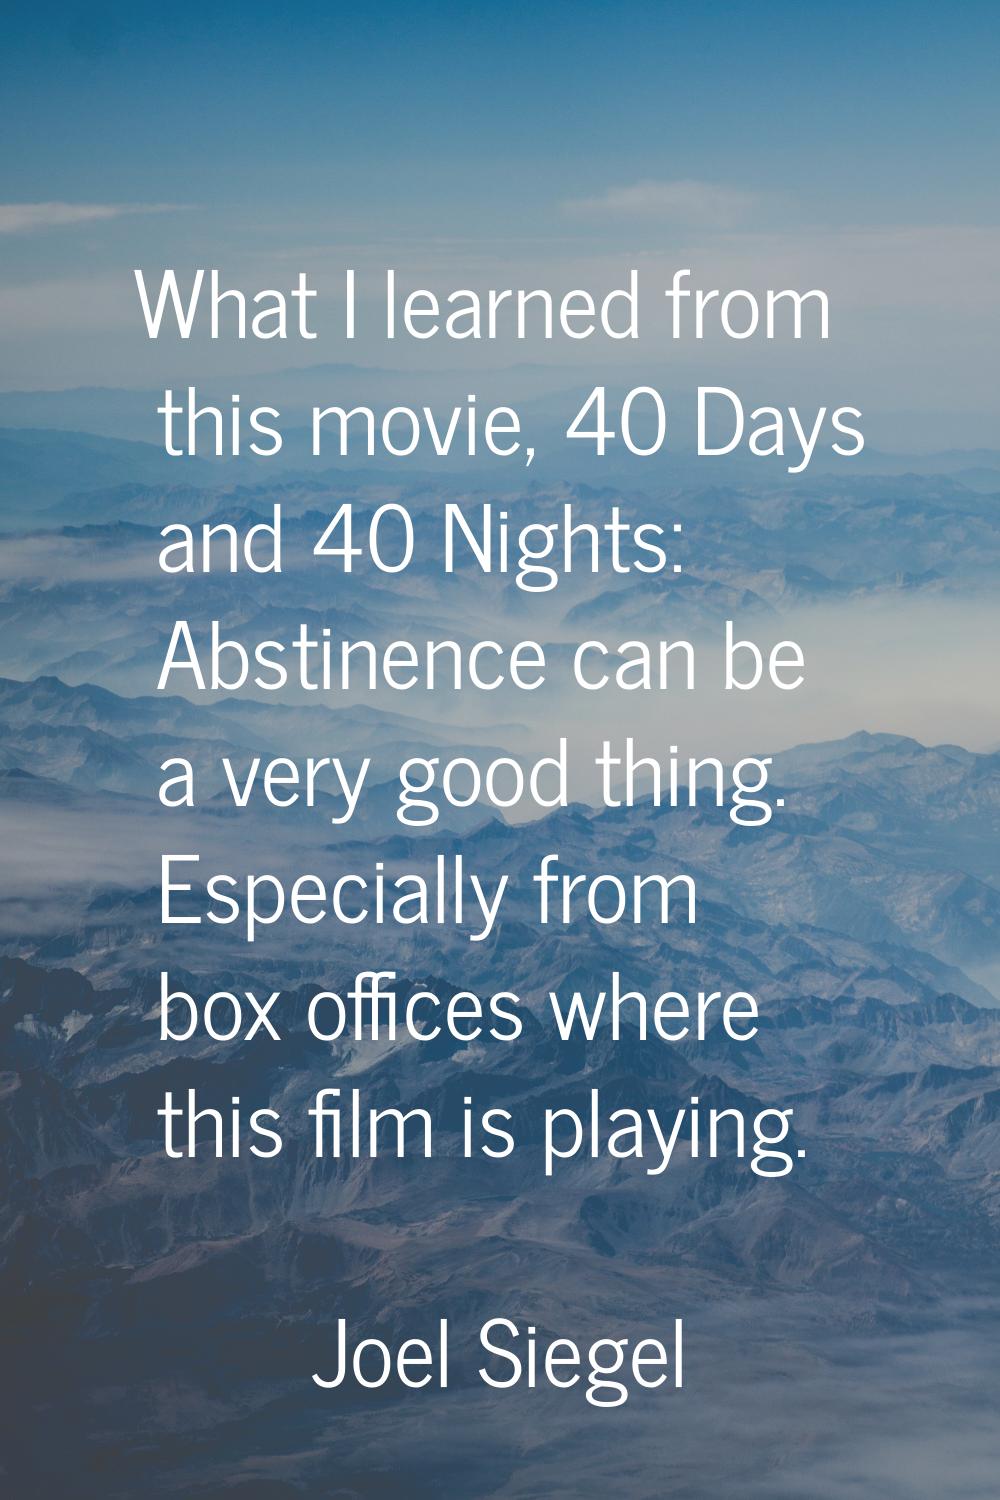 What I learned from this movie, 40 Days and 40 Nights: Abstinence can be a very good thing. Especia